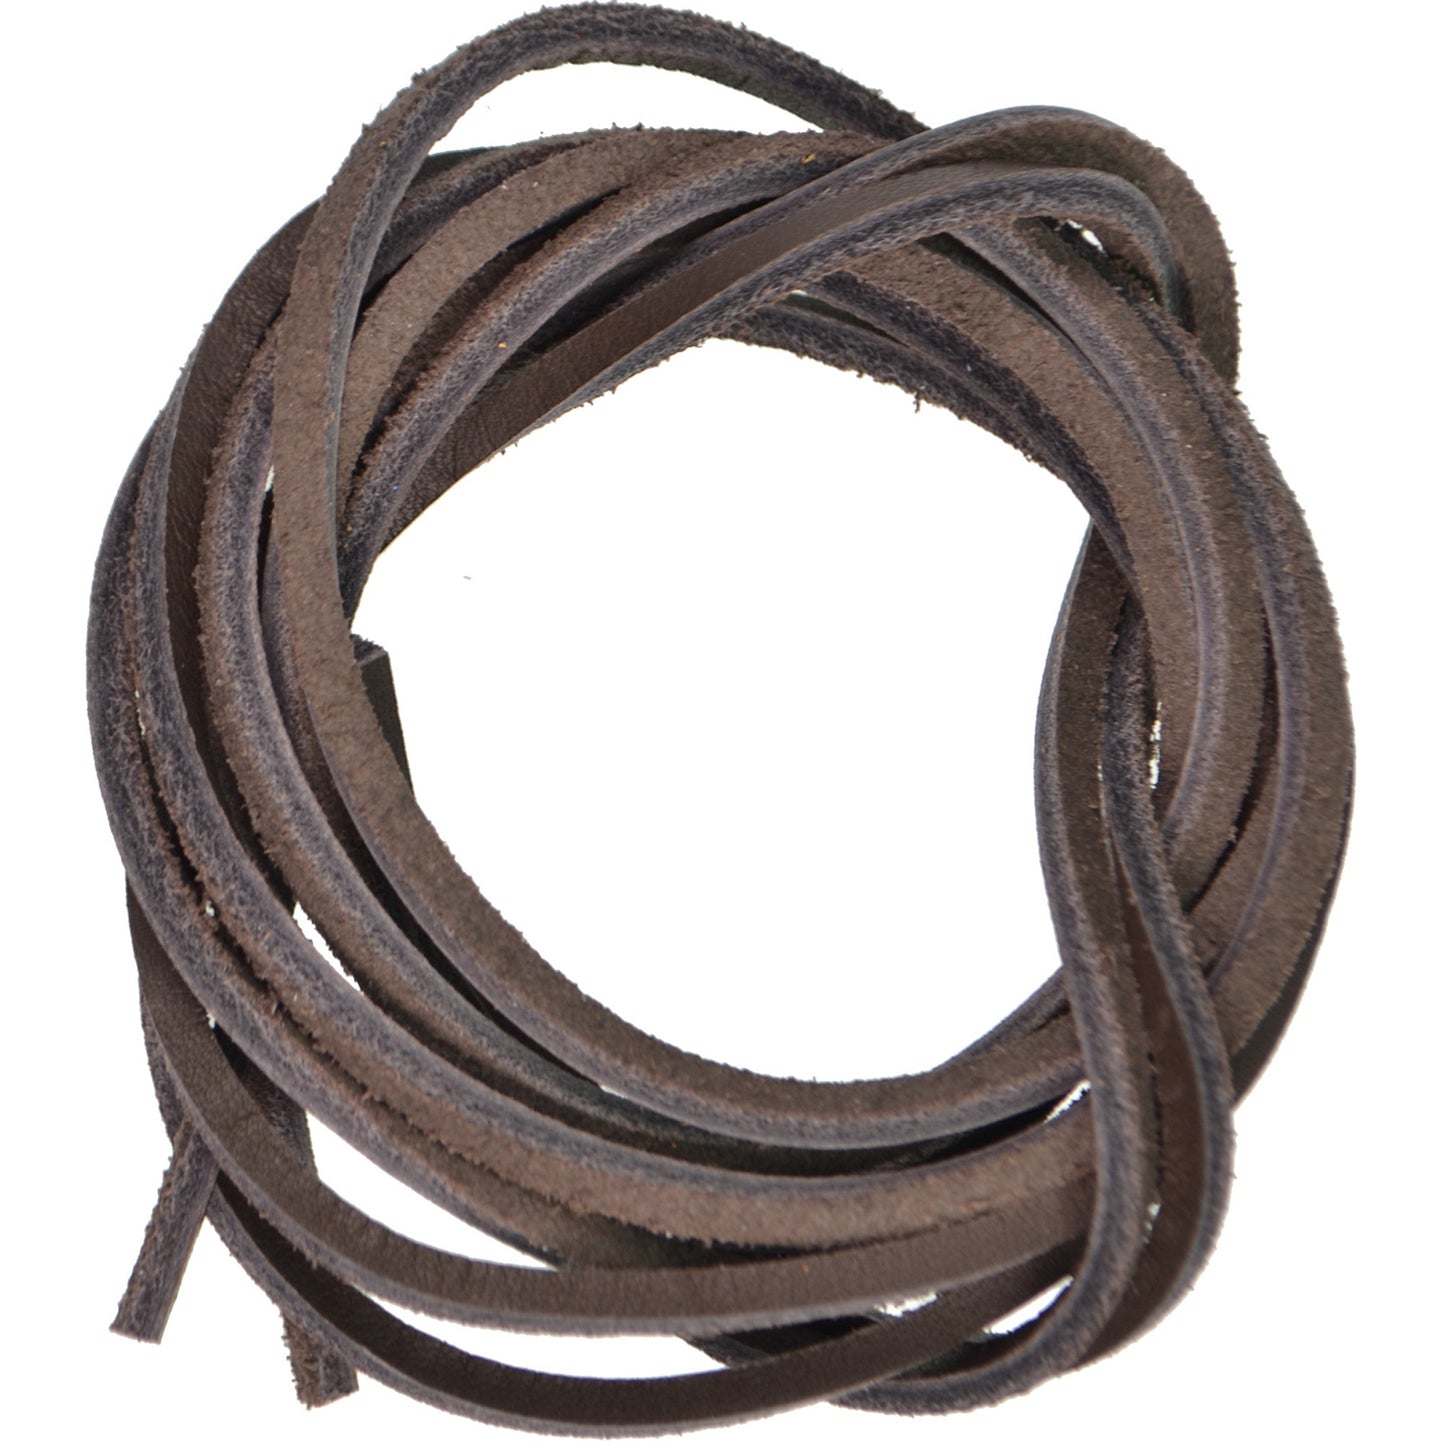 120cm Leather Shoe Laces - Dark Brown - 3mm